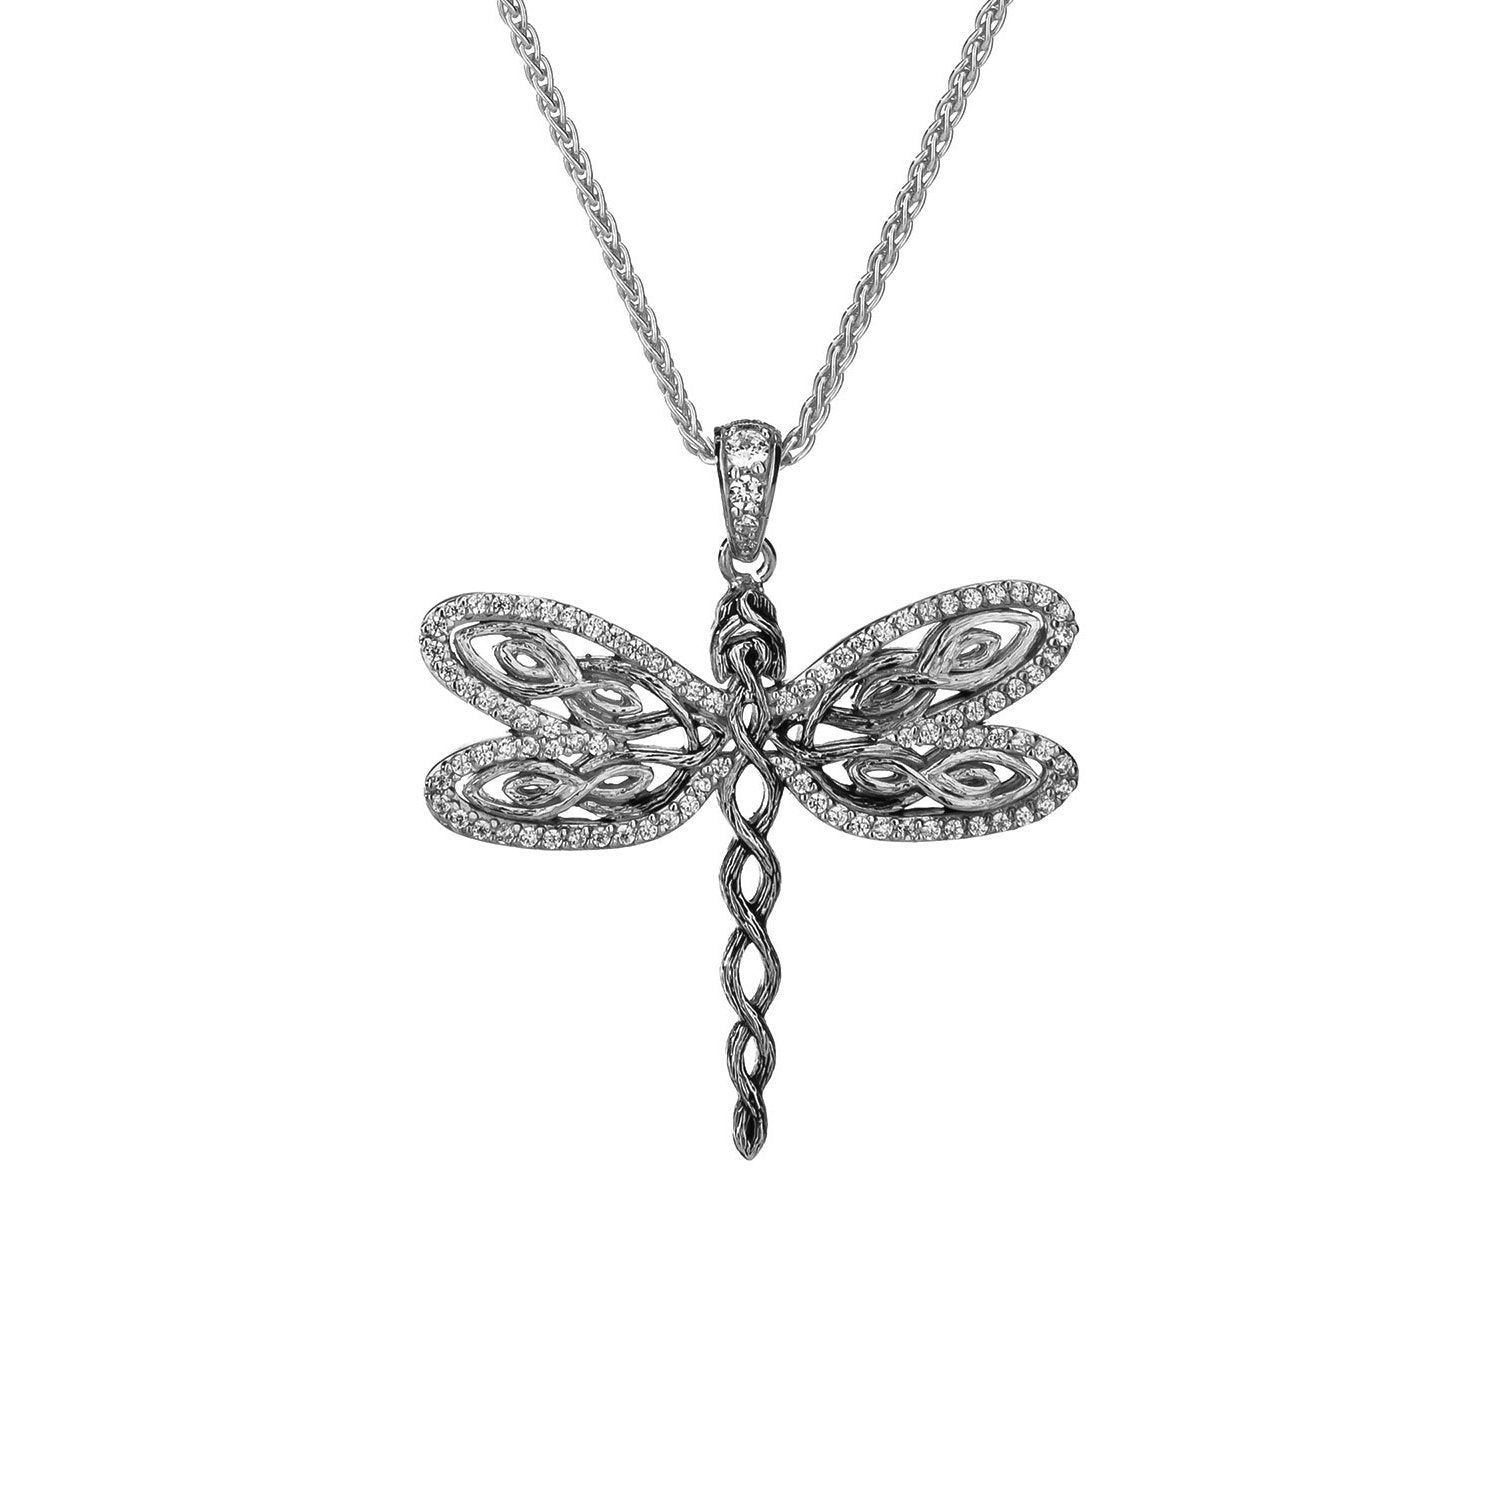 Dragonfly Pendant - Sterling Silver / Dark Rhodium and White Cubic Zirconia